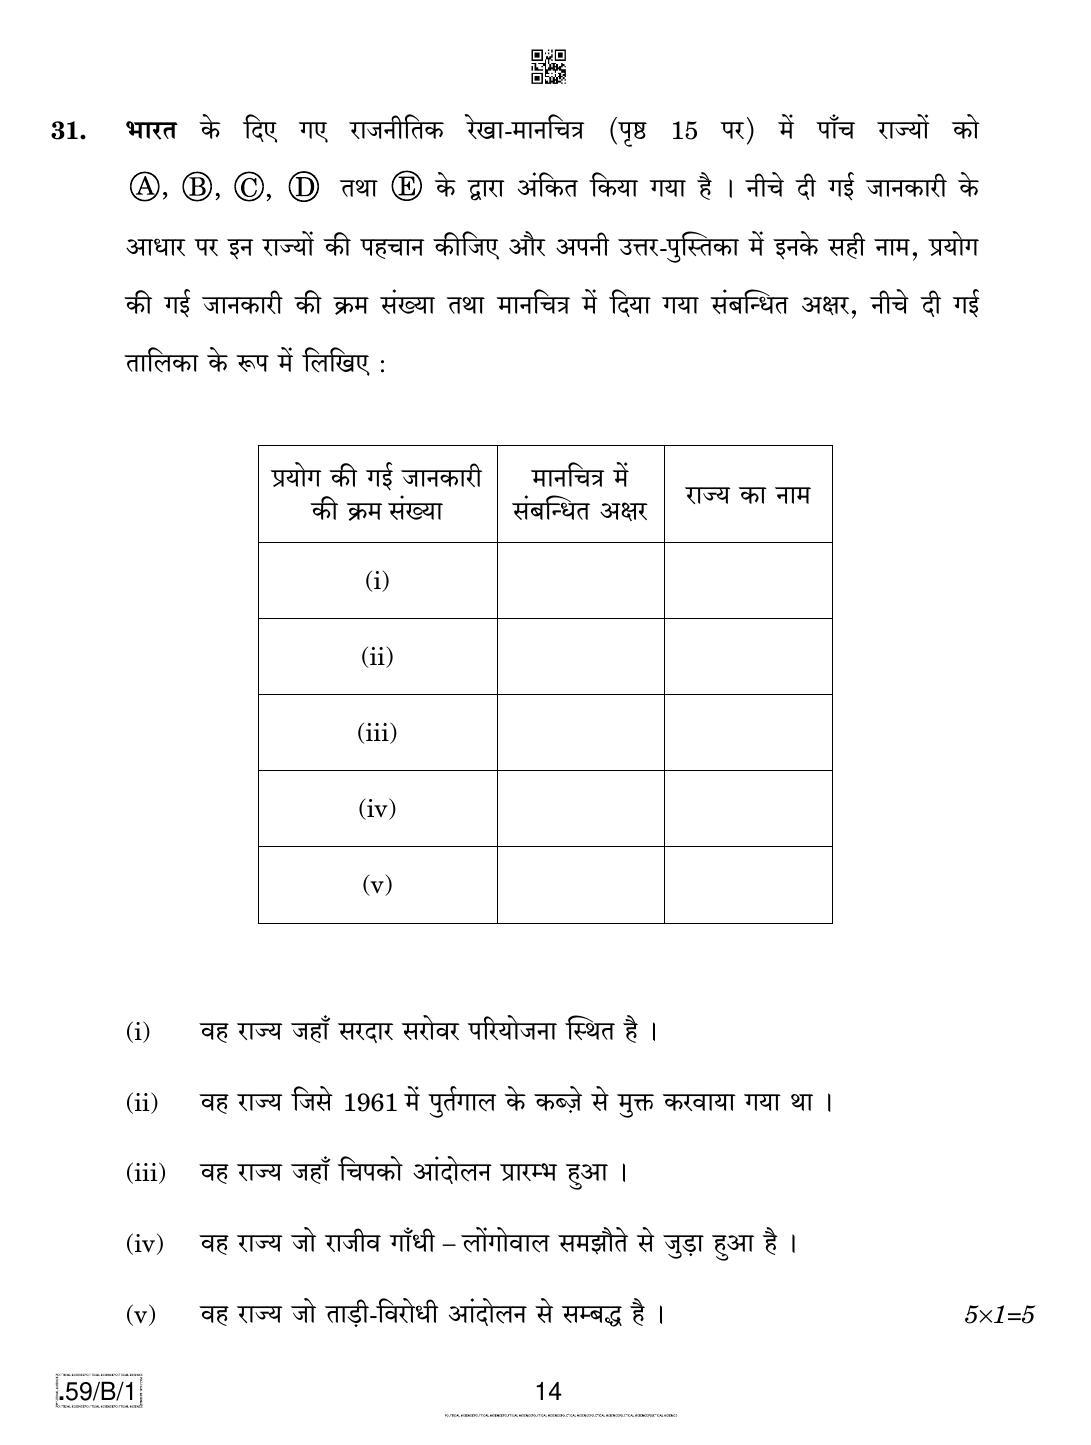 CBSE Class 12 59-C-1 - Political Science 2020 Compartment Question Paper - Page 14